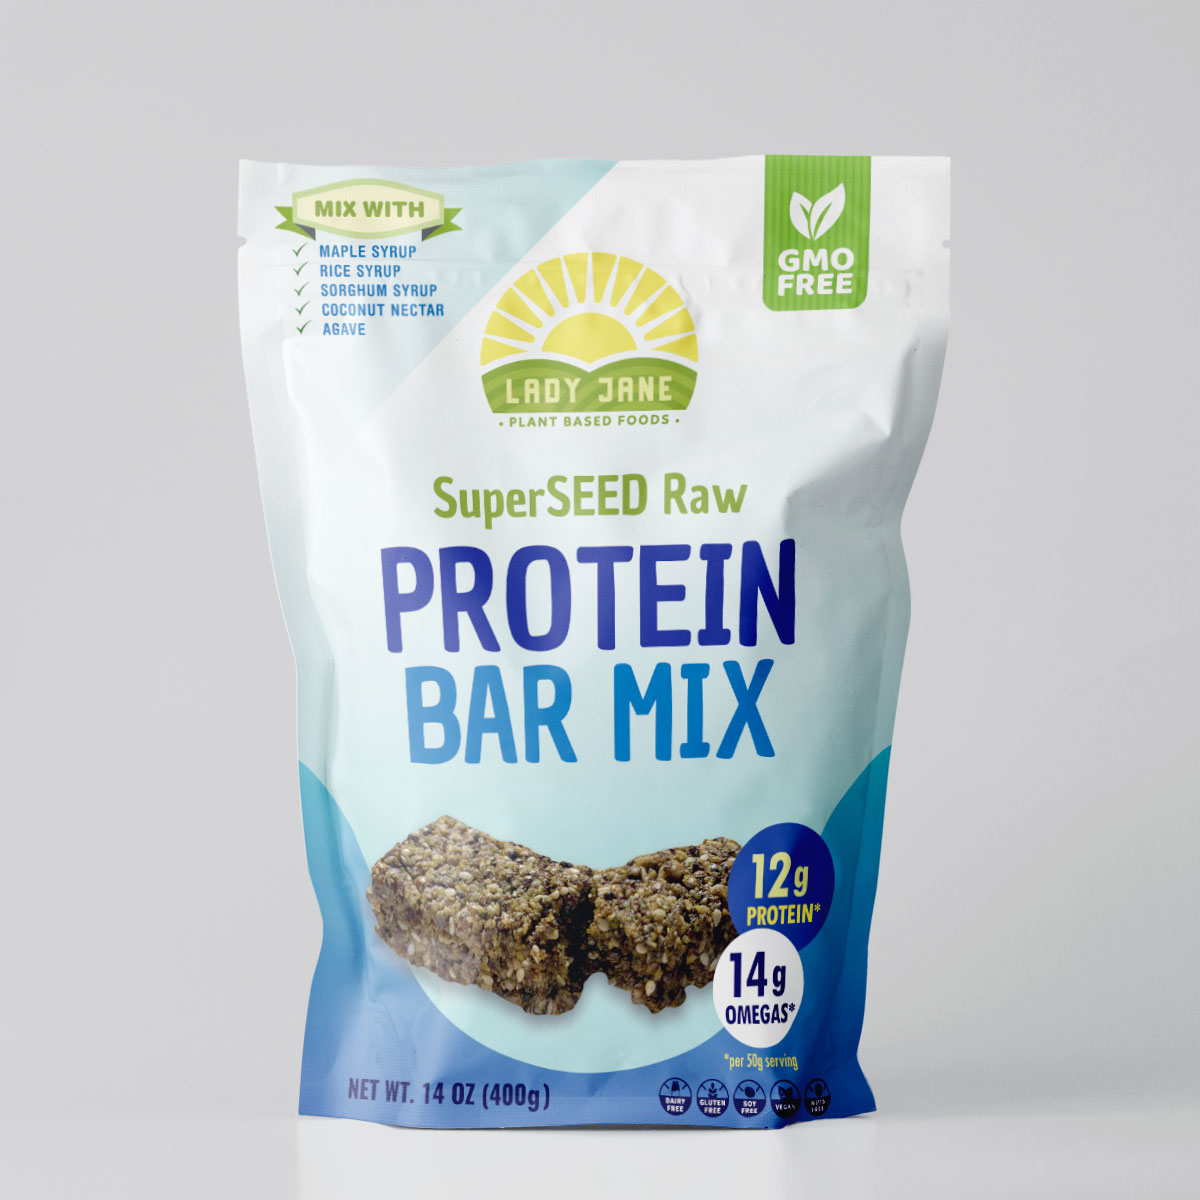 The BEST Vegan Protein Bar – SuperSEED Raw Protein Bar!